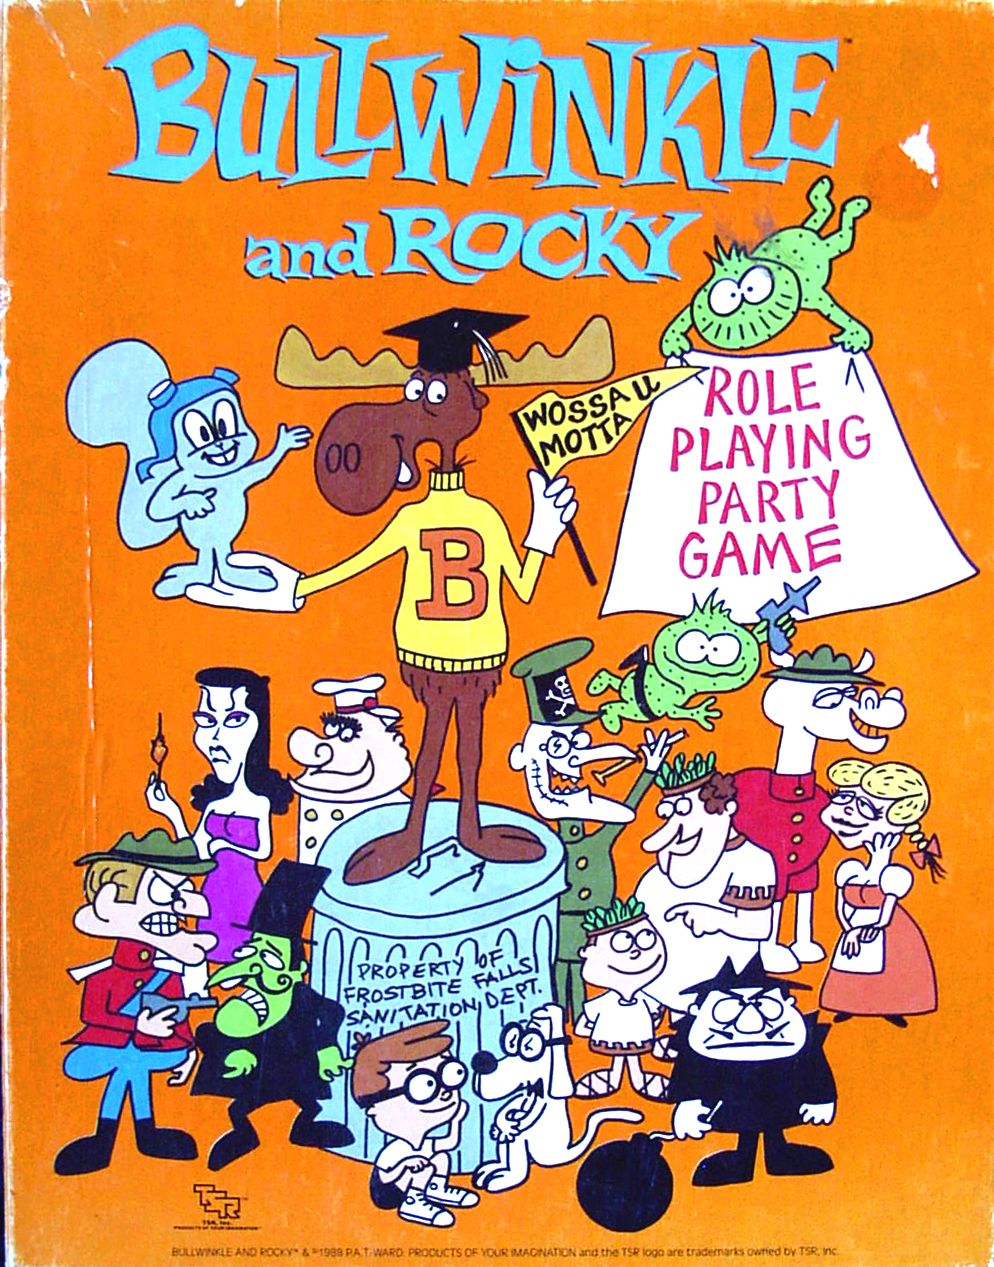 Bullwinkle and Rocky Role Playing Party Game